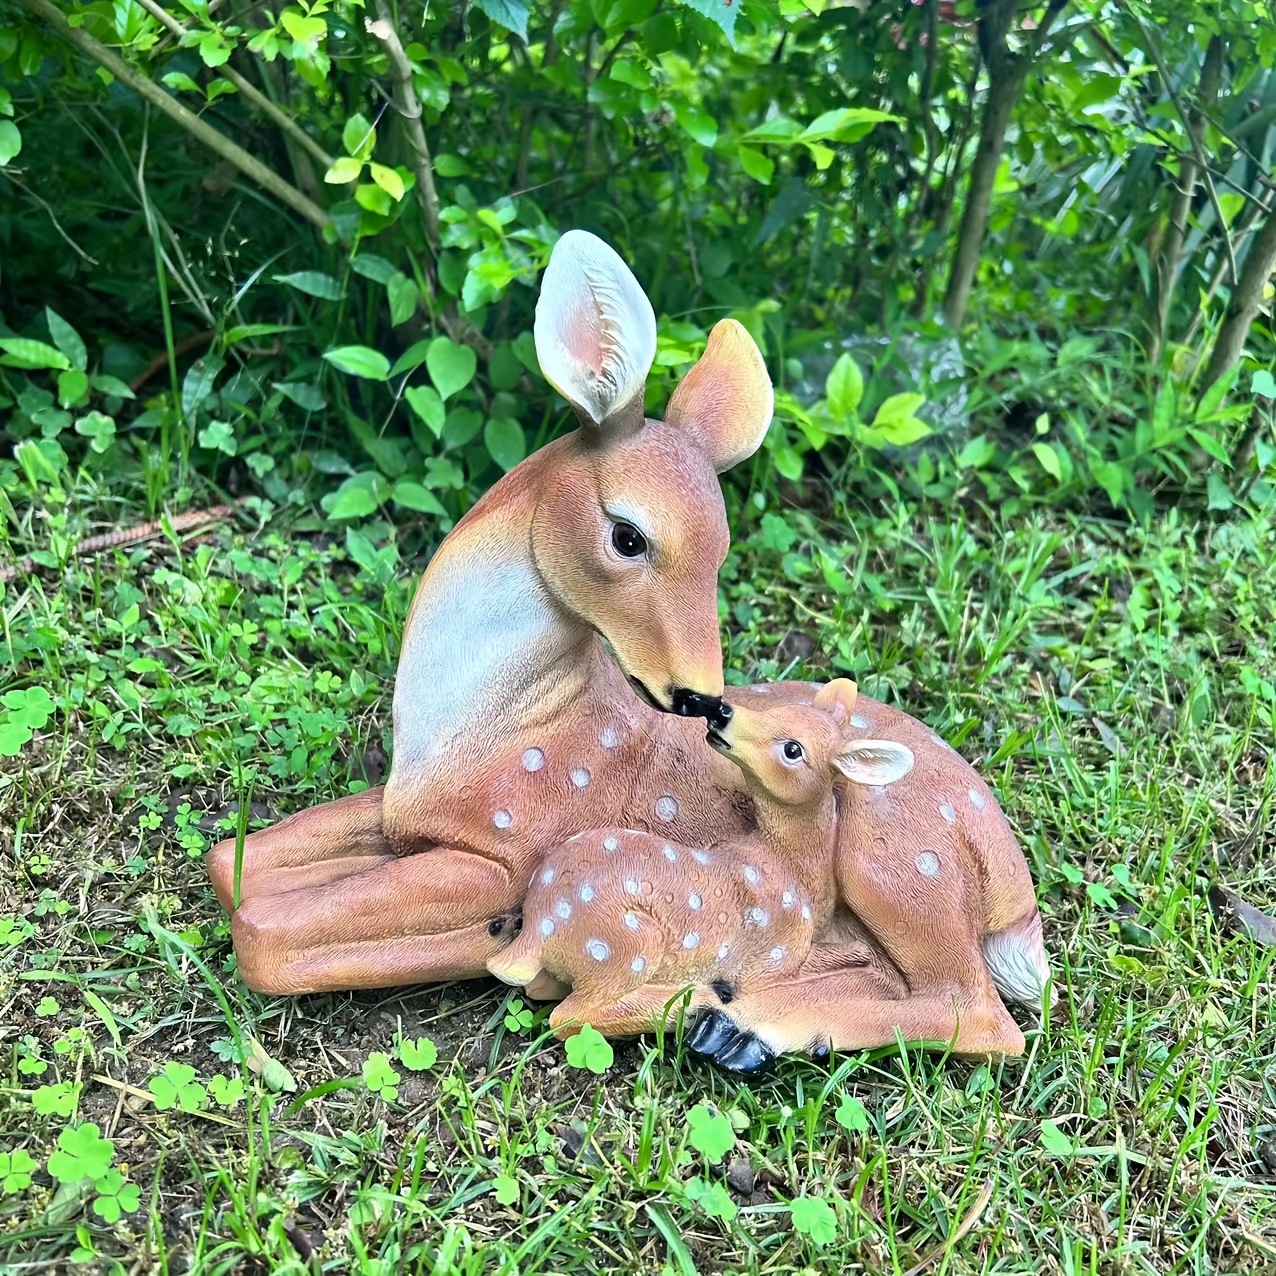 

Resin Deer Sculpture - Mother And Fawn Figurine, Garden Decor Statuette, Outdoor Patio Ornament, Home Interior Wildlife Accent